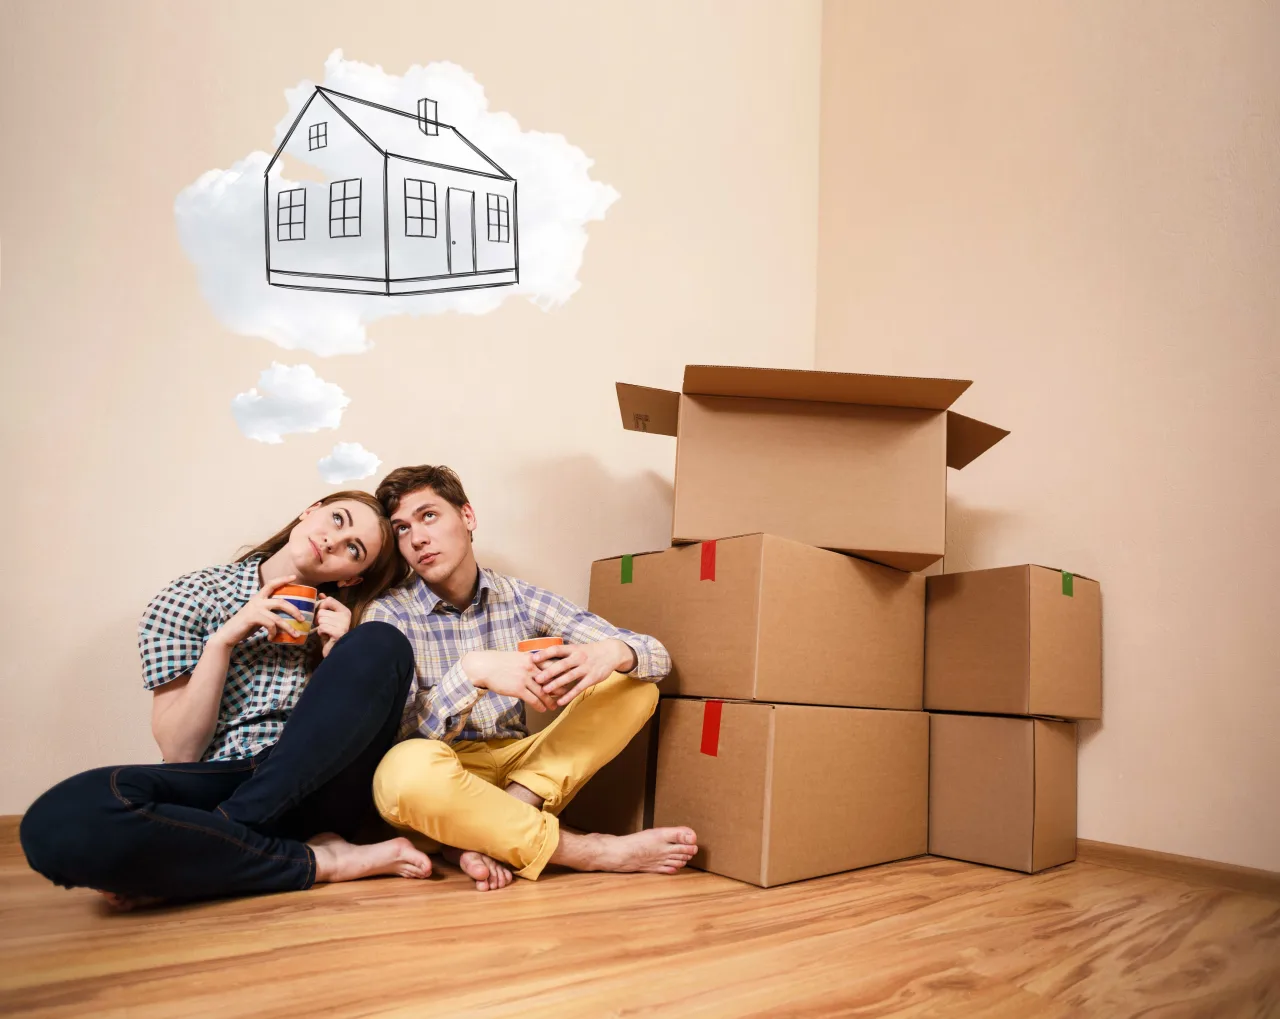 14 Tips For First-Time Homebuyers